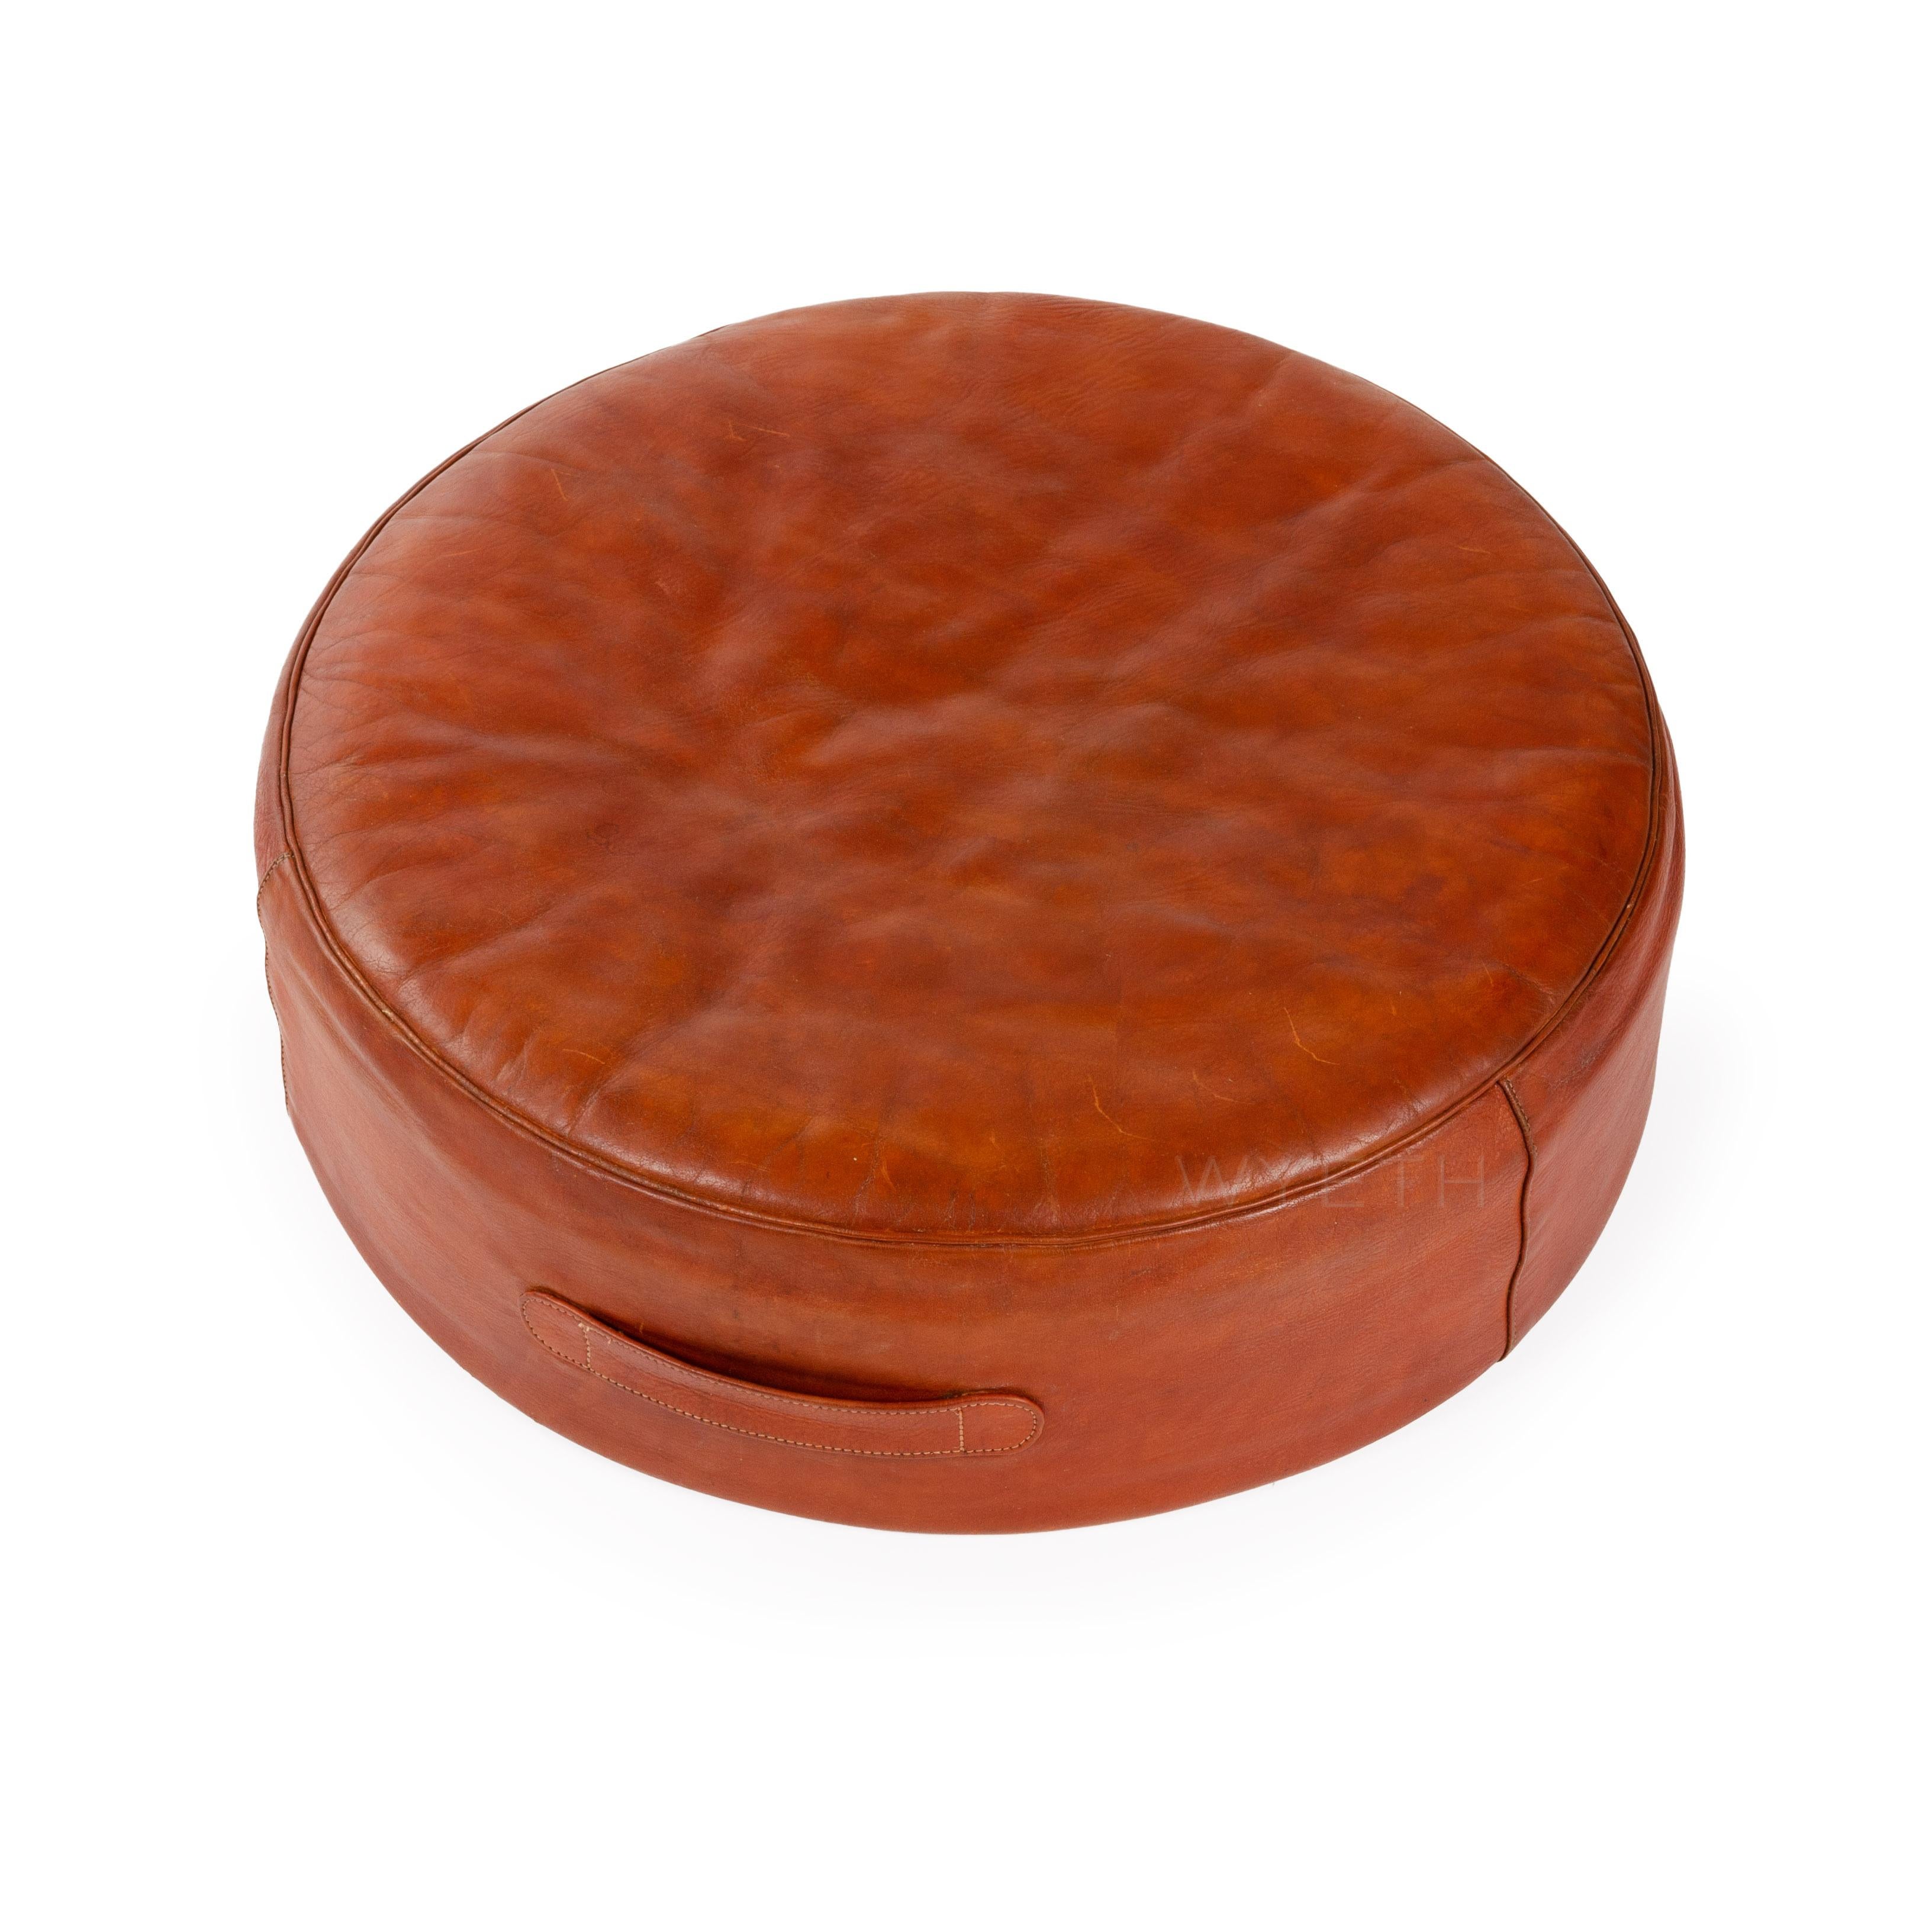 A round leather ottoman / stool retaining the original red leather upholstery and leather handle.